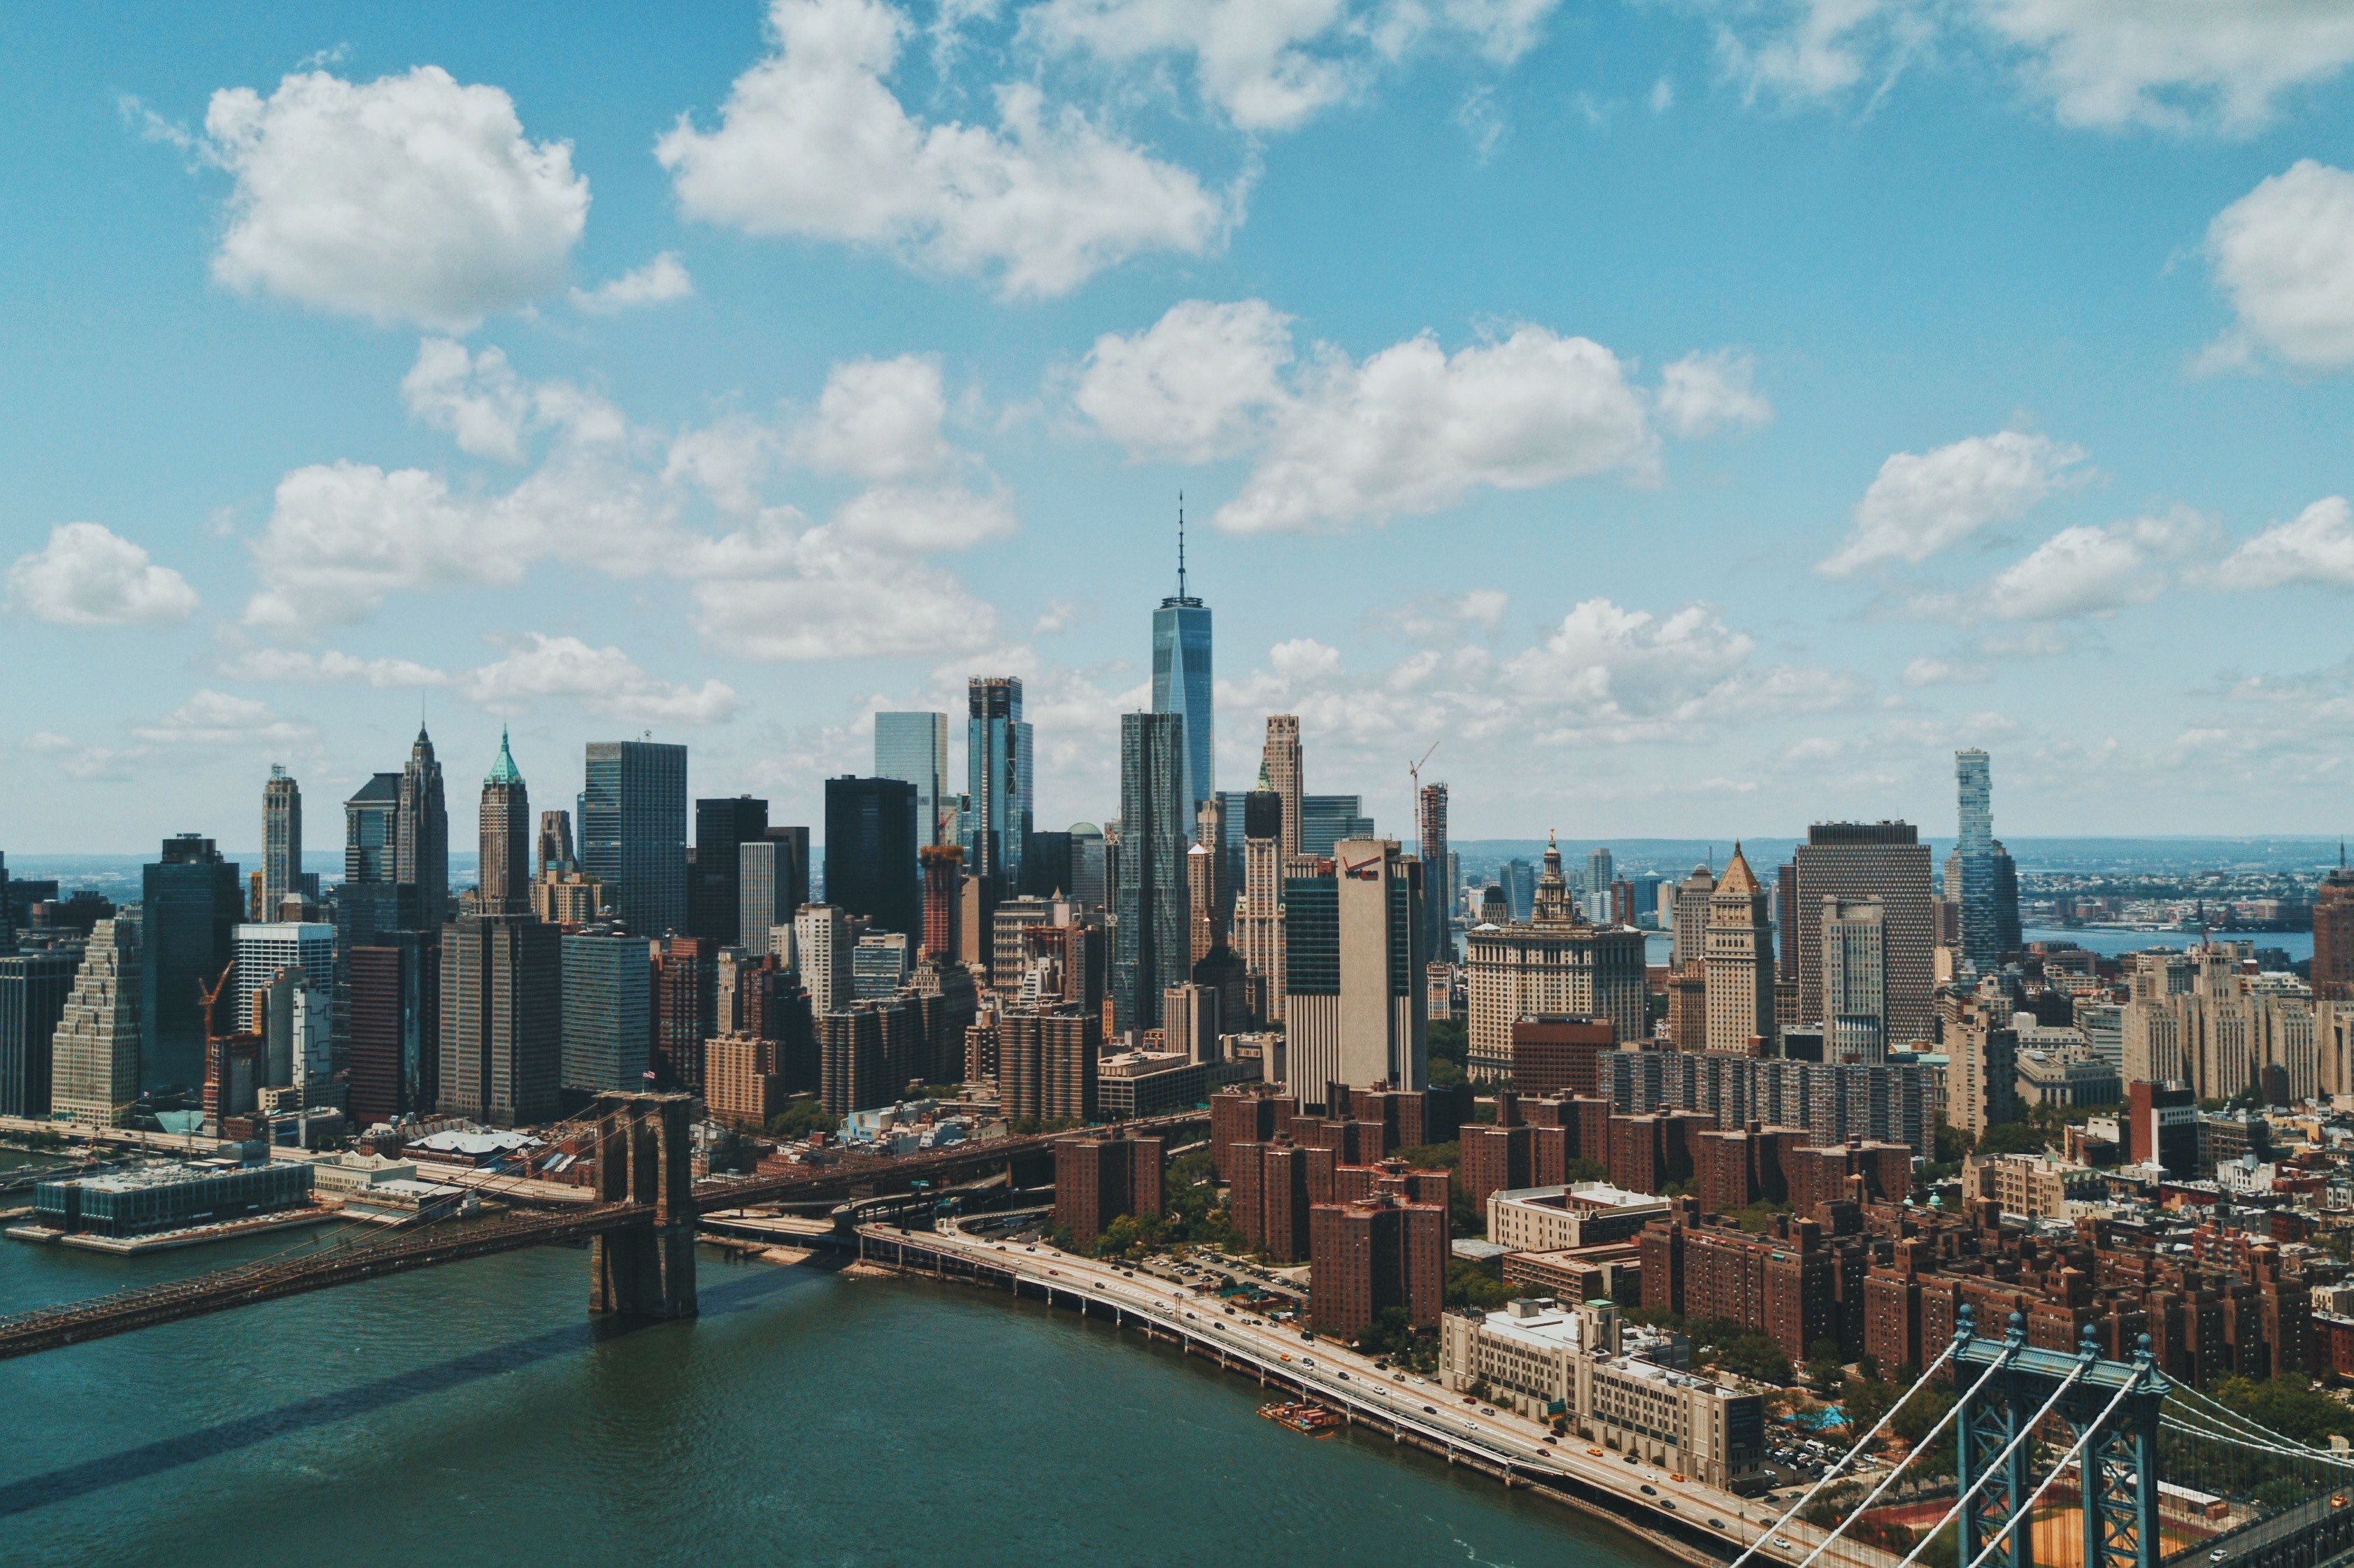 Wallpaper id the skyline of new york near the manhattan bridge manhattan skyline k wallpaper free download